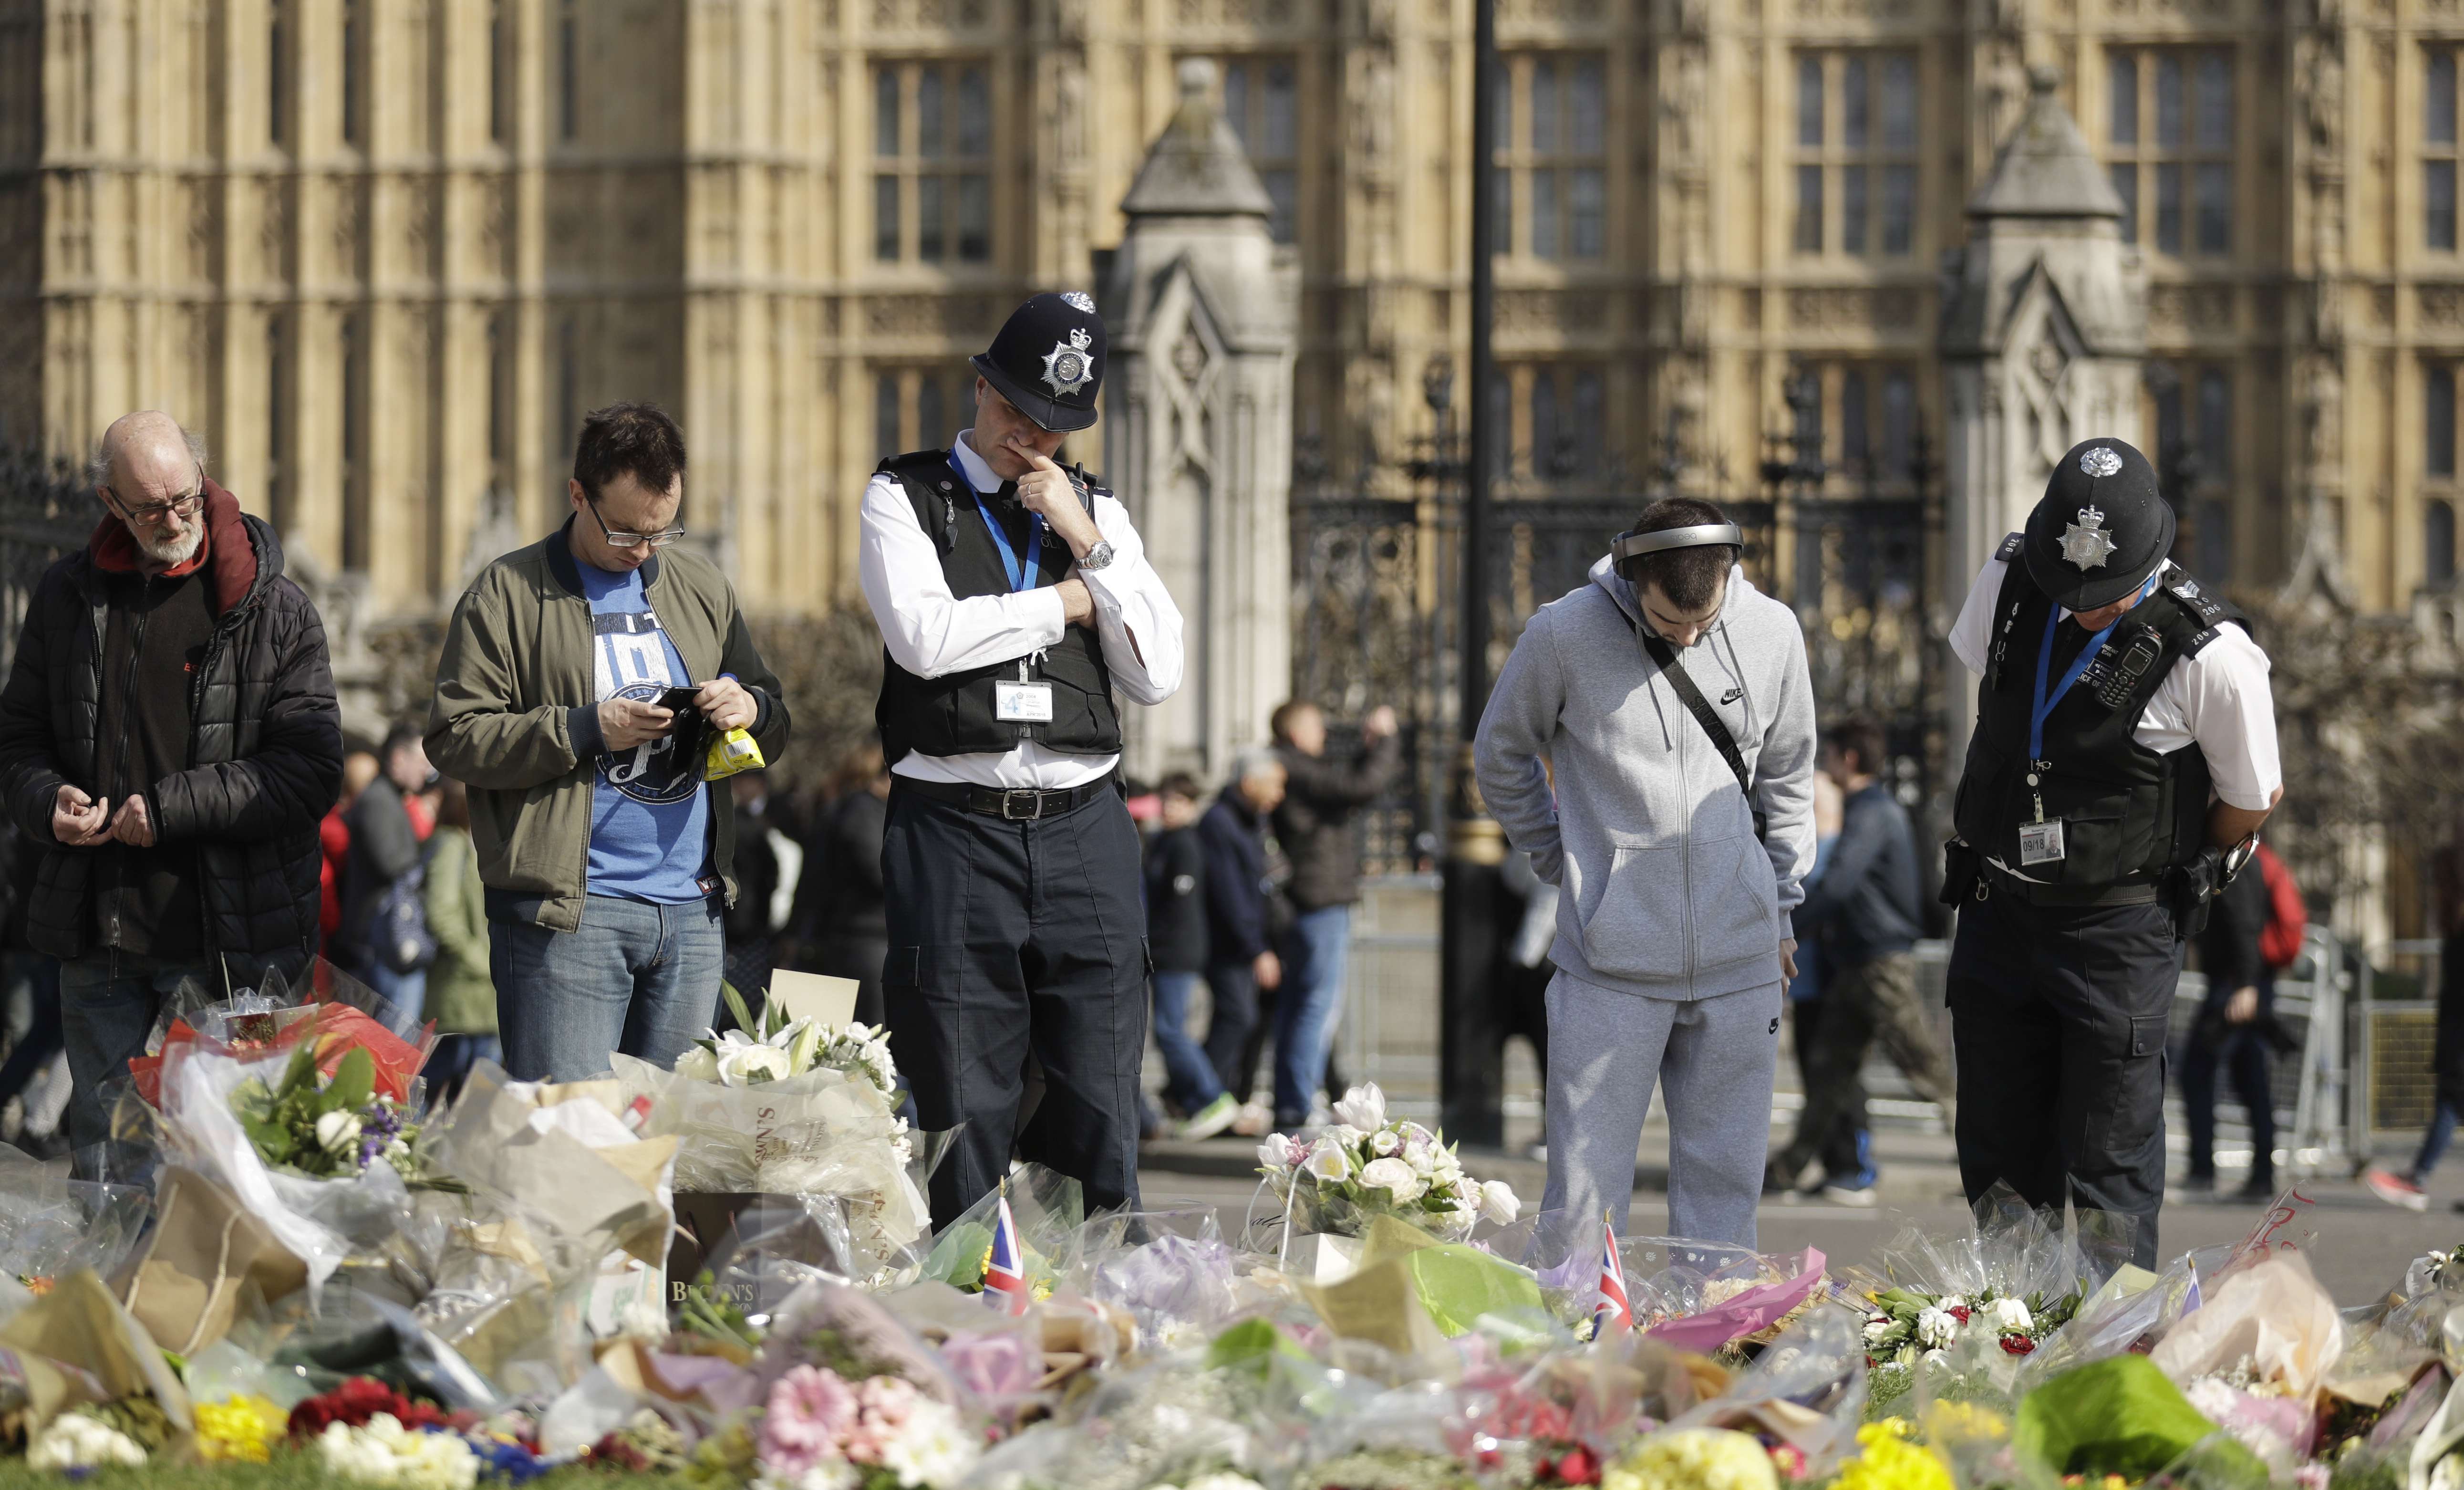 Police officers and members of the public look at the floral tributes to the victims of the Westminster attack placed outside the Palace of Westminster, London, on Monday. Photo: AP